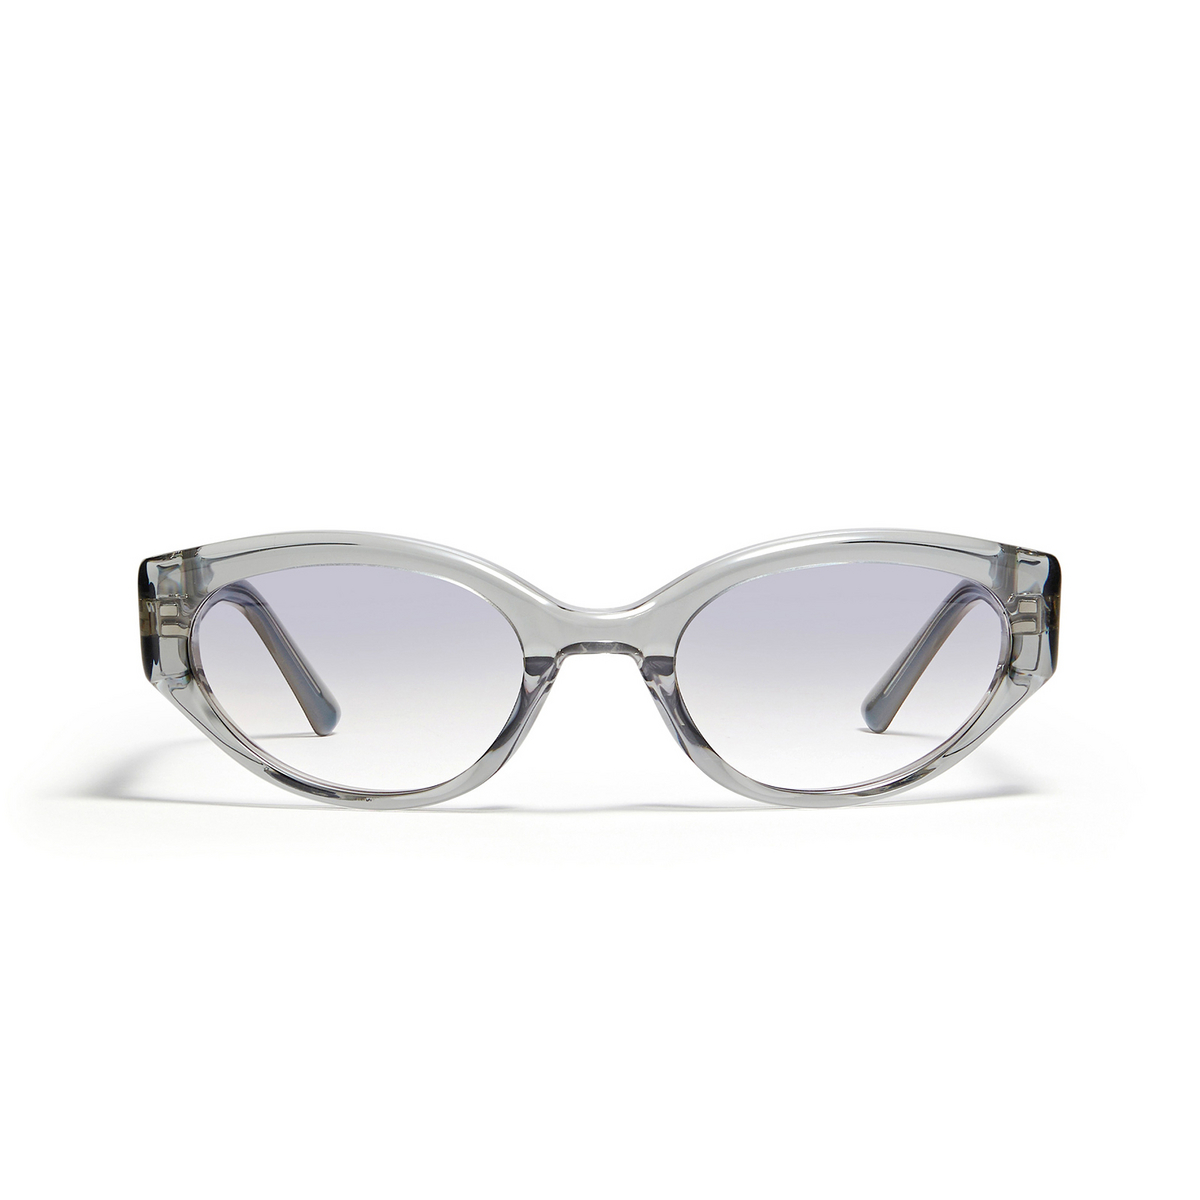 Gentle Monster® Cat-eye Sunglasses: Molto color GC5 Grey - front view